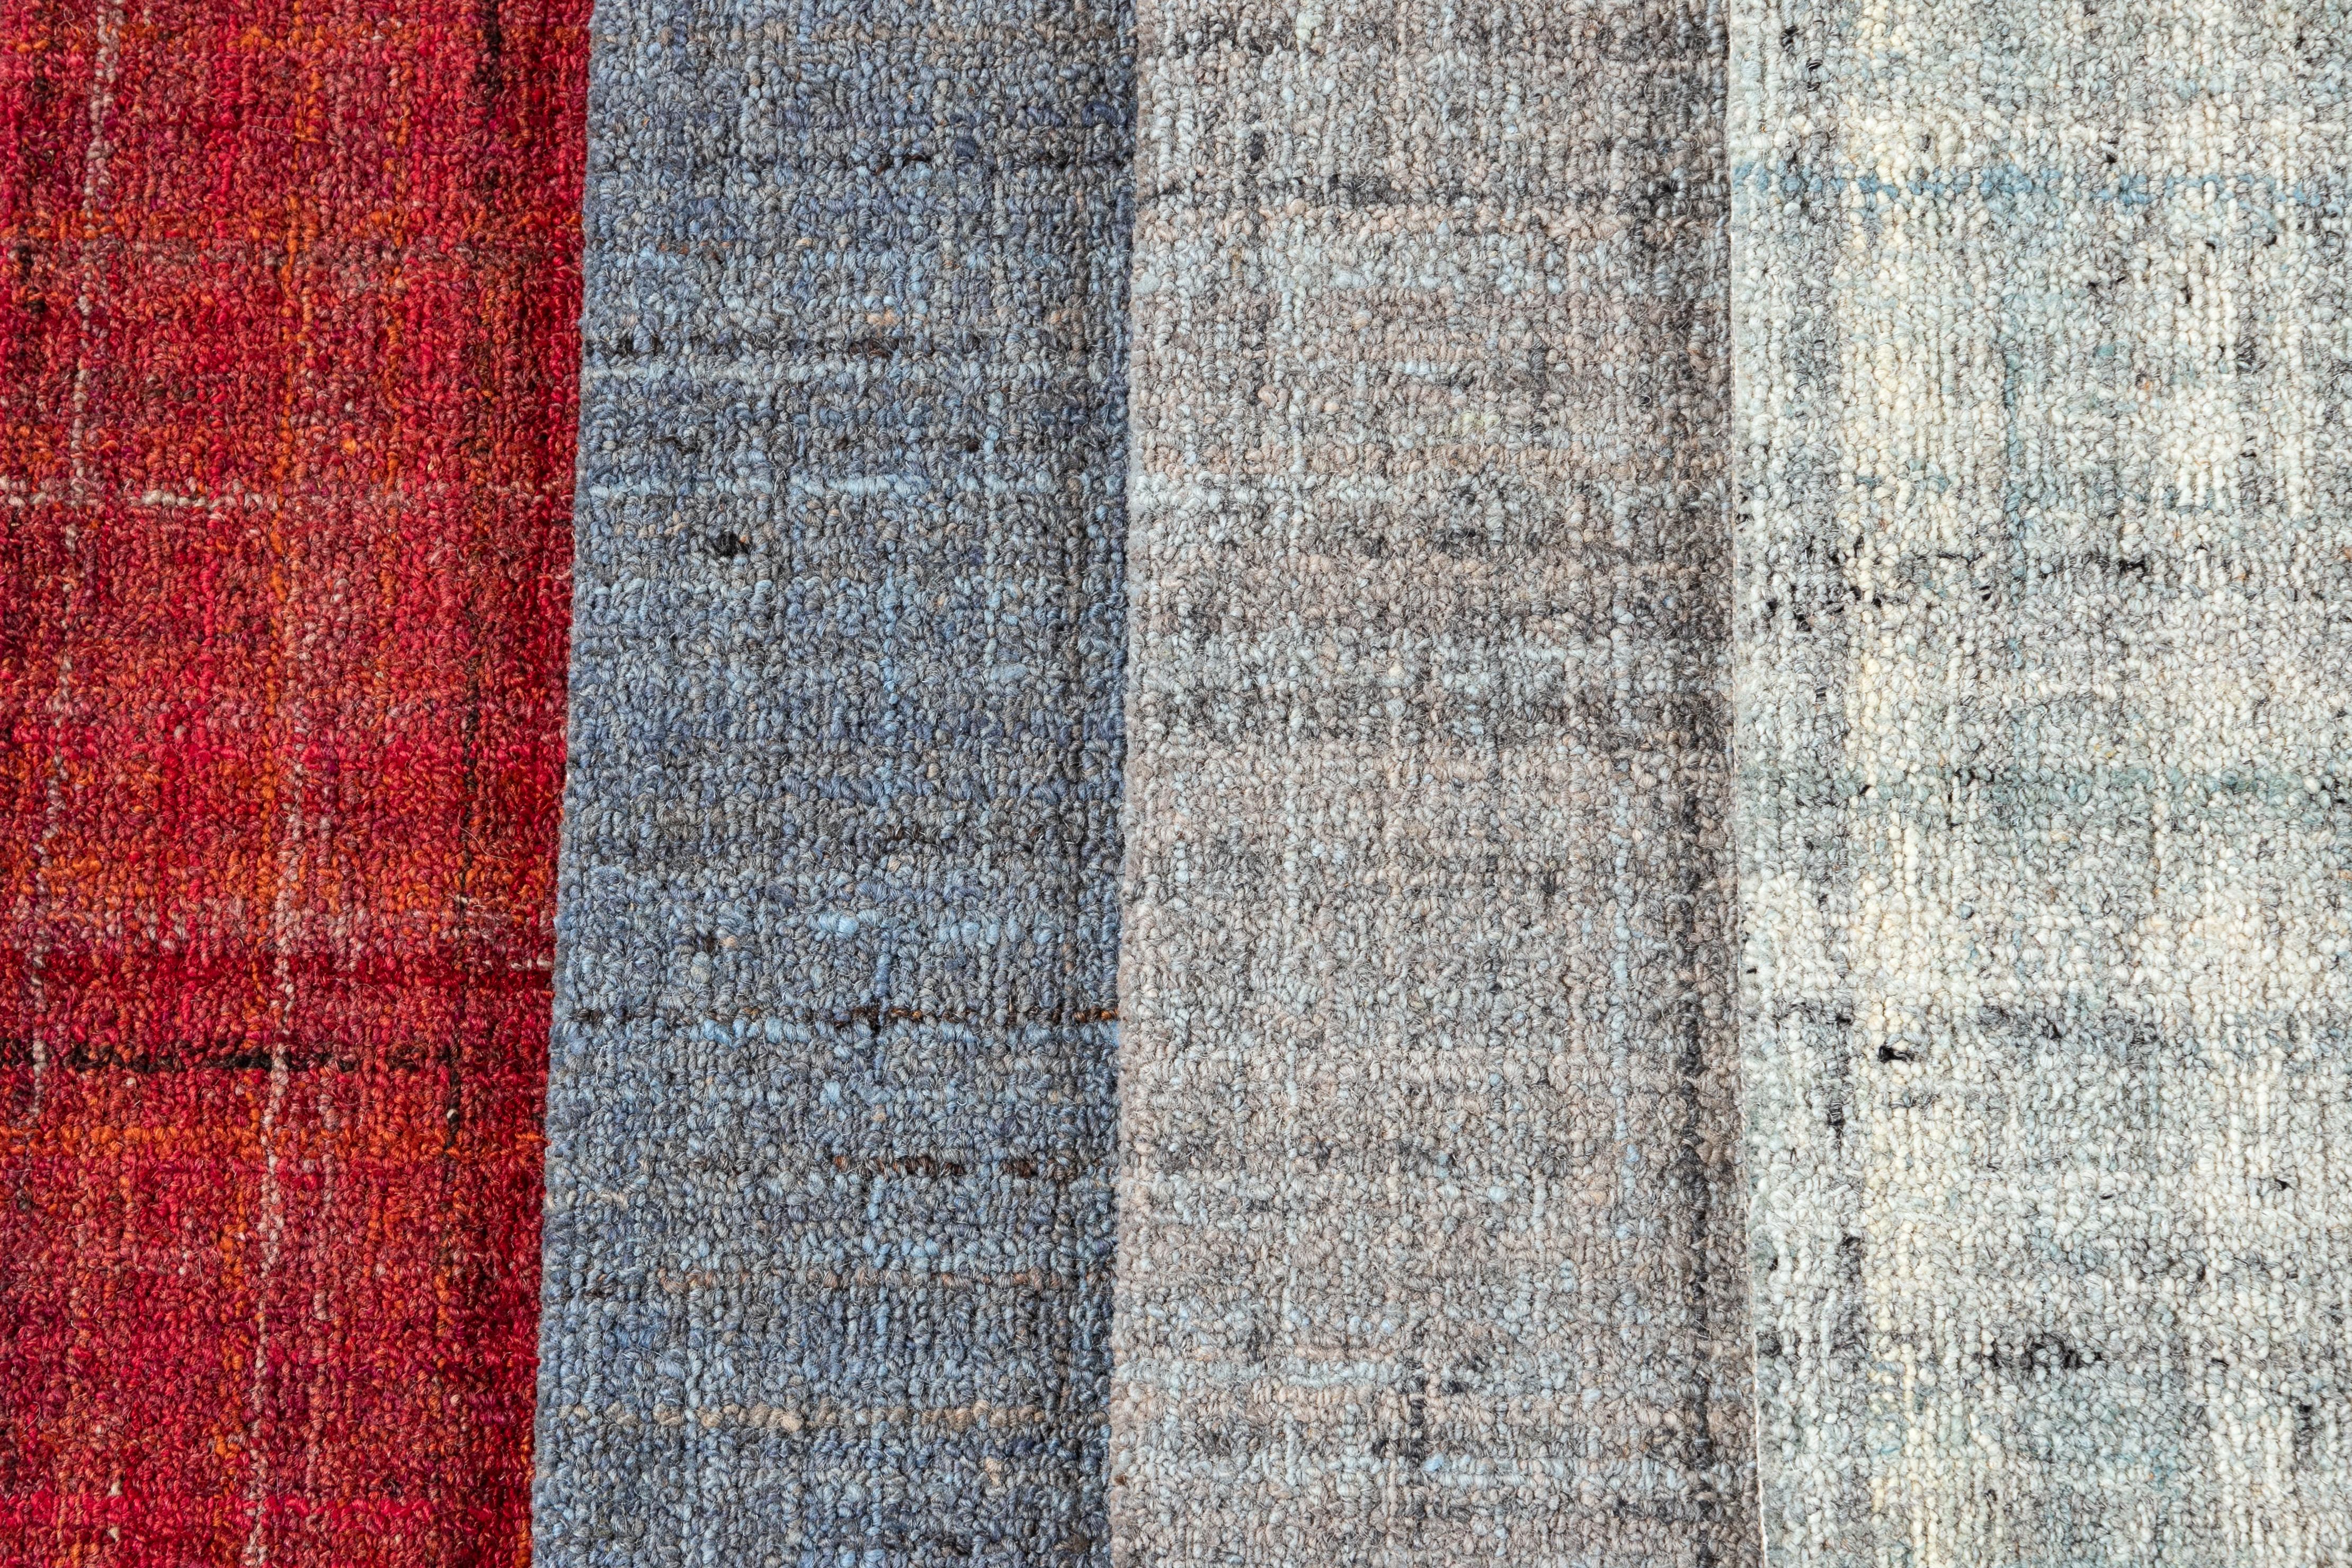 Tufted wool custom rug. Custom sizes and colors made-to-order.

Material: Tufted wool
Lead time: Approximate 12 weeks
Available colors: 20+ shades and styles
Made in India.

(Note: Pricing listed is for an 8' x 10' rug.)
 